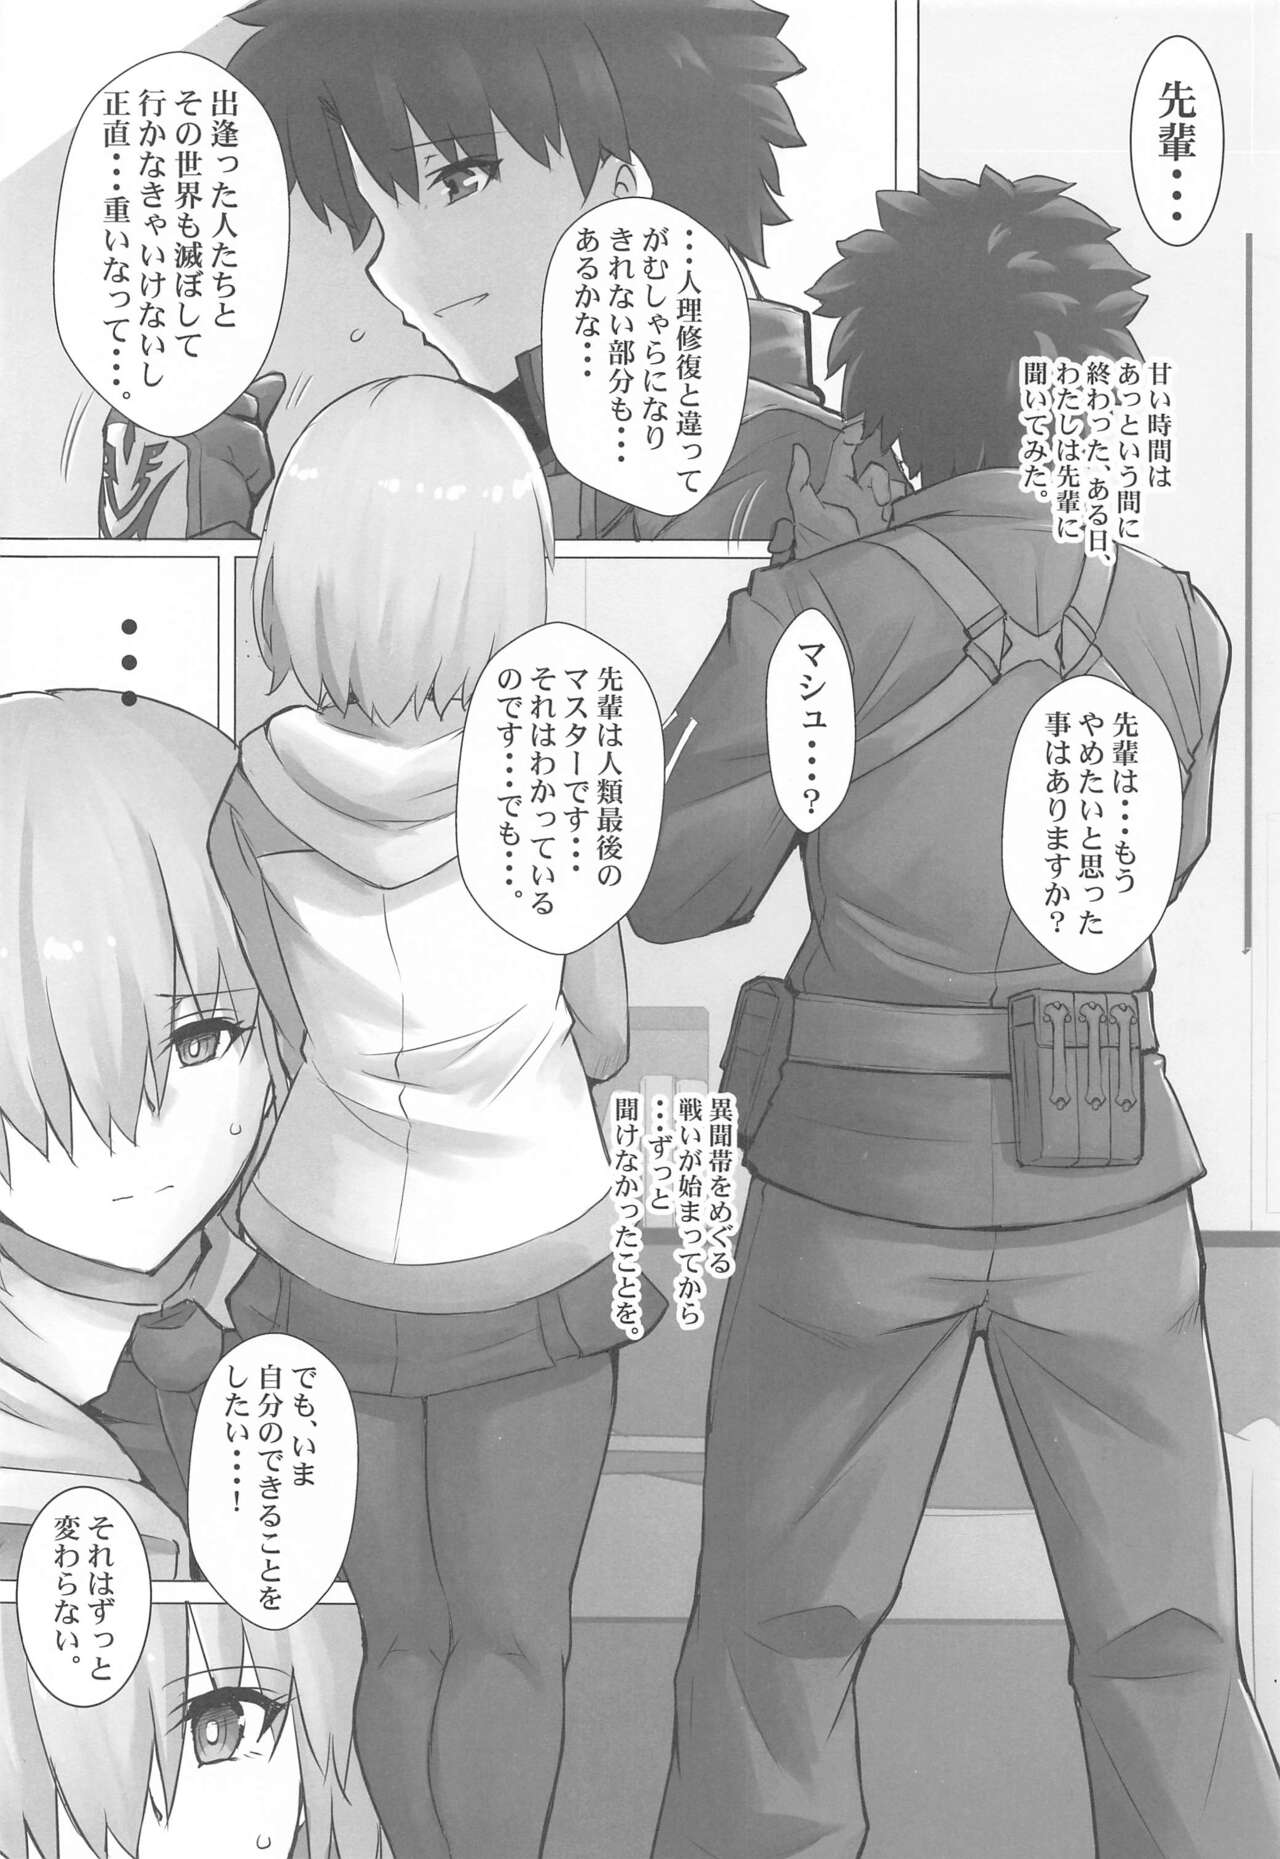 (C99) [ケダモノ屋さん (真っ赤なケダモノ)] Connect with you (Fate/Grand Order)